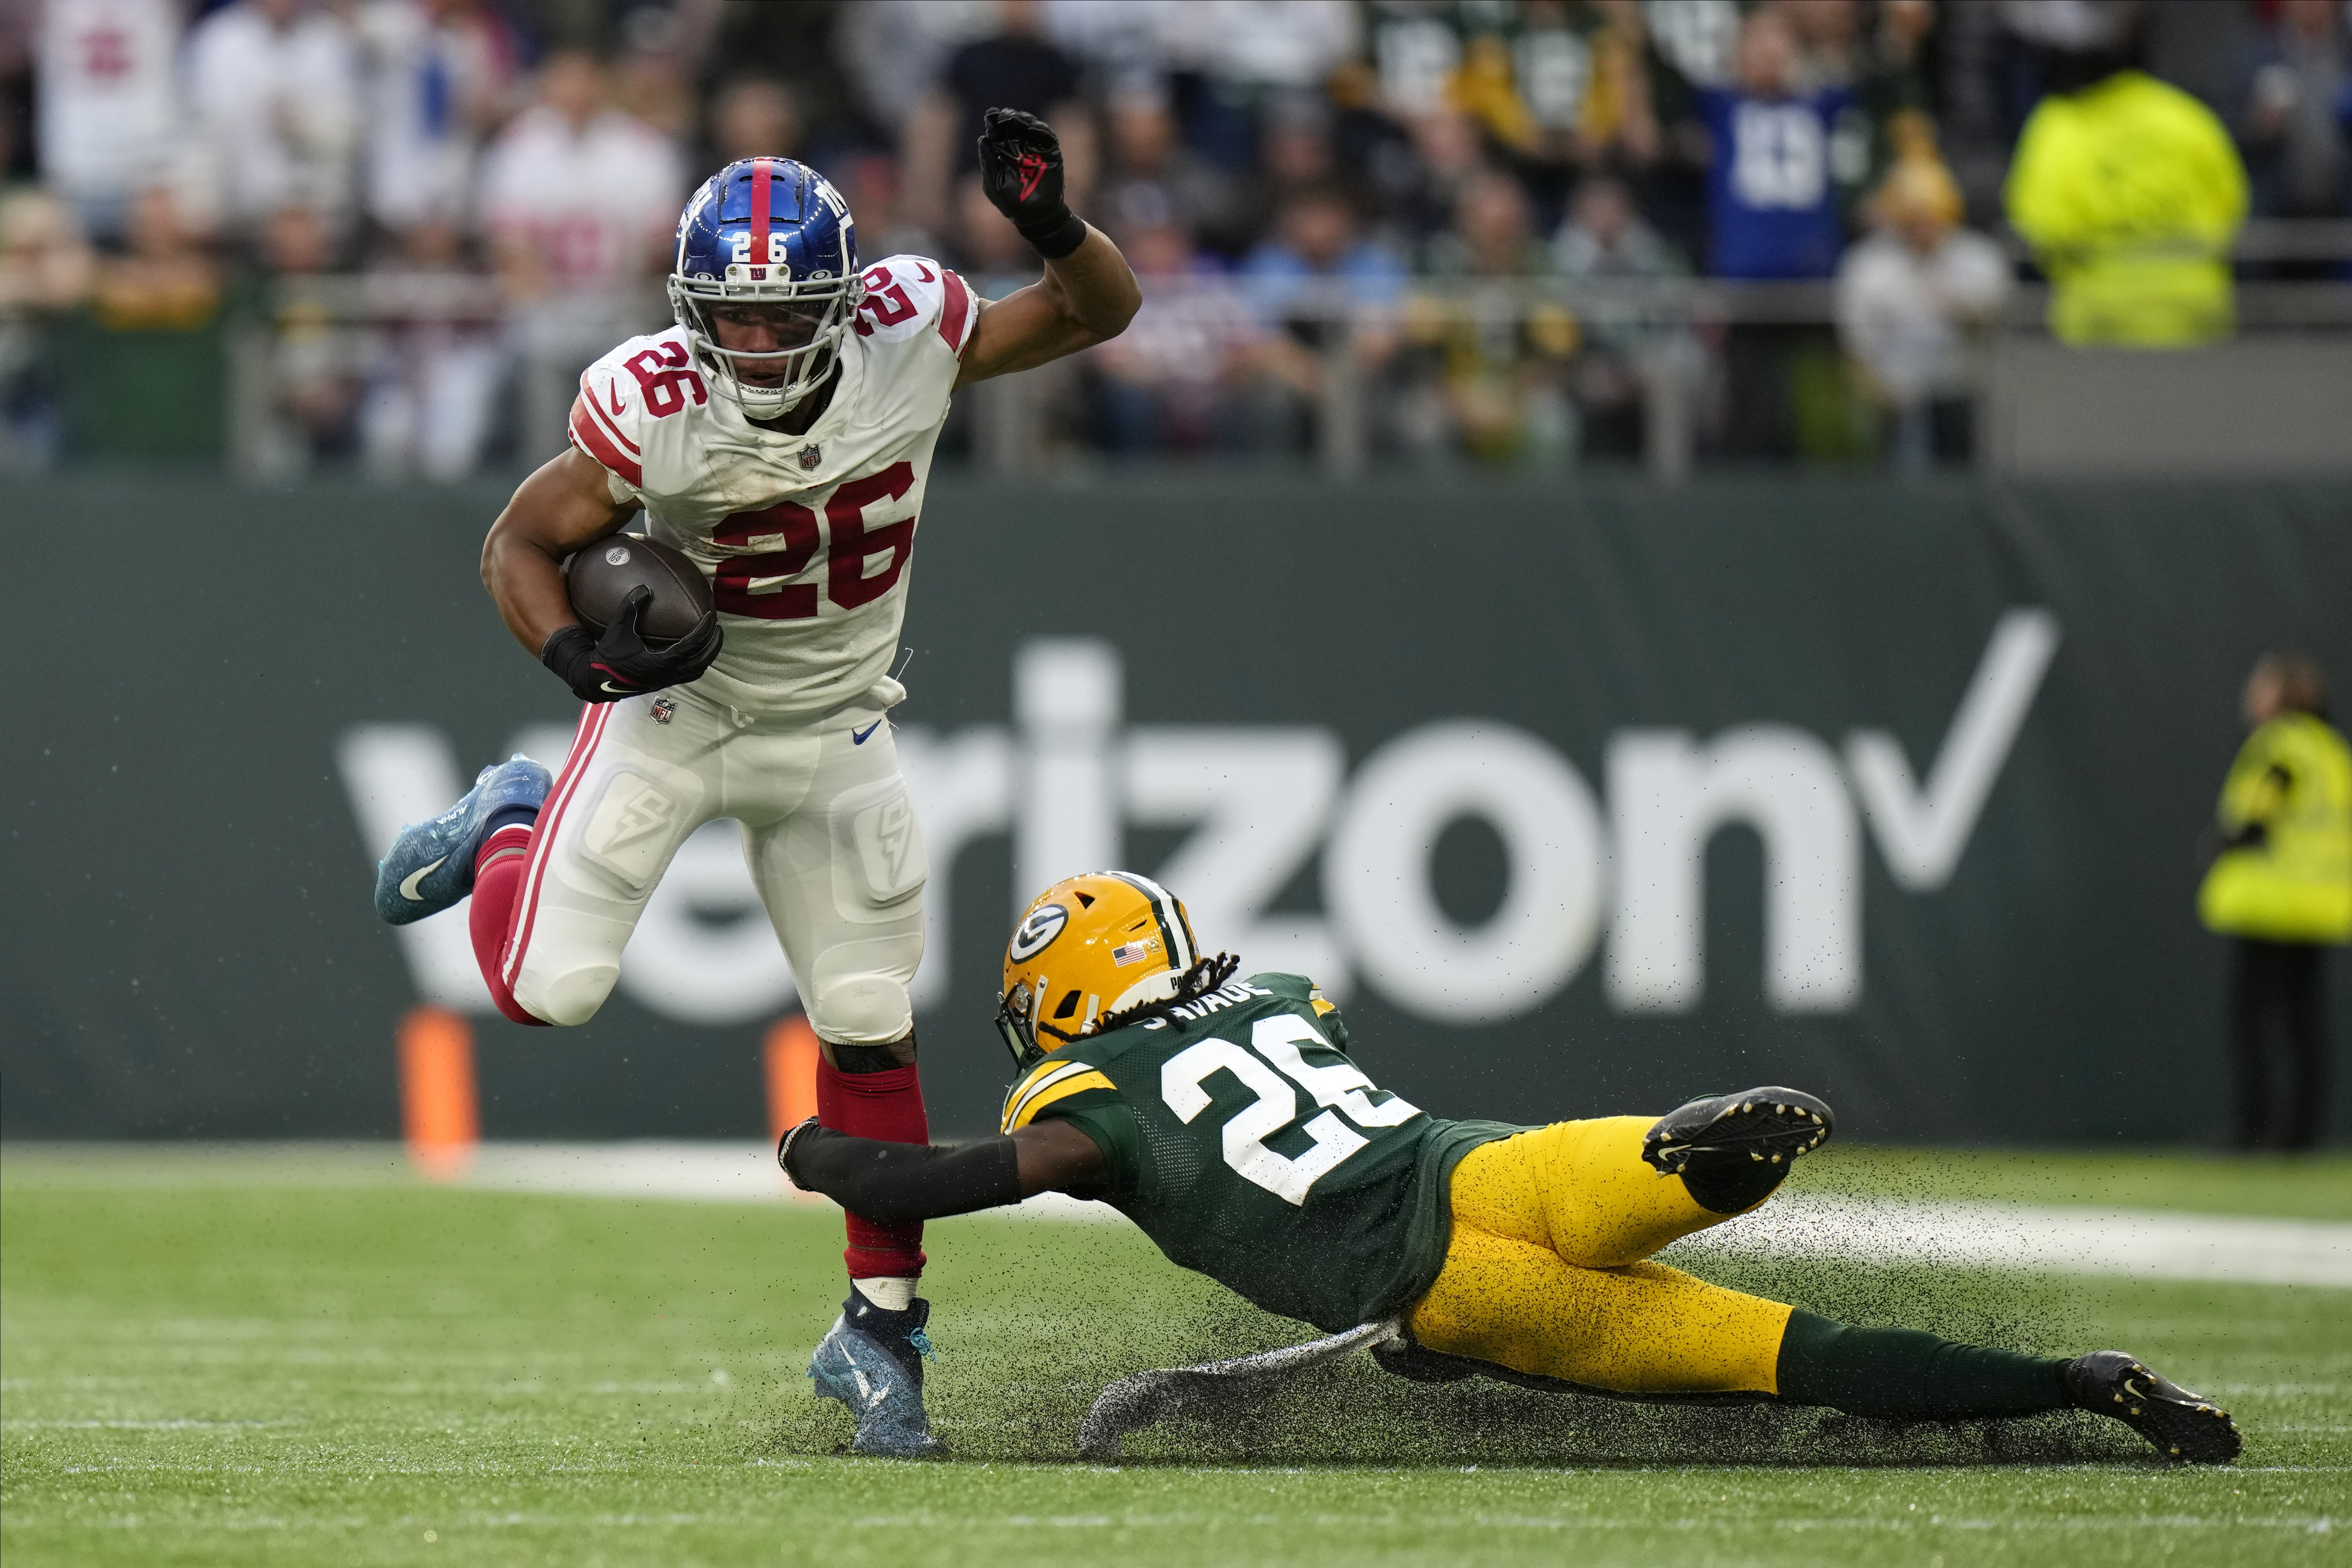 How to watch New York Giants vs. Green Bay Packers in London: NFL